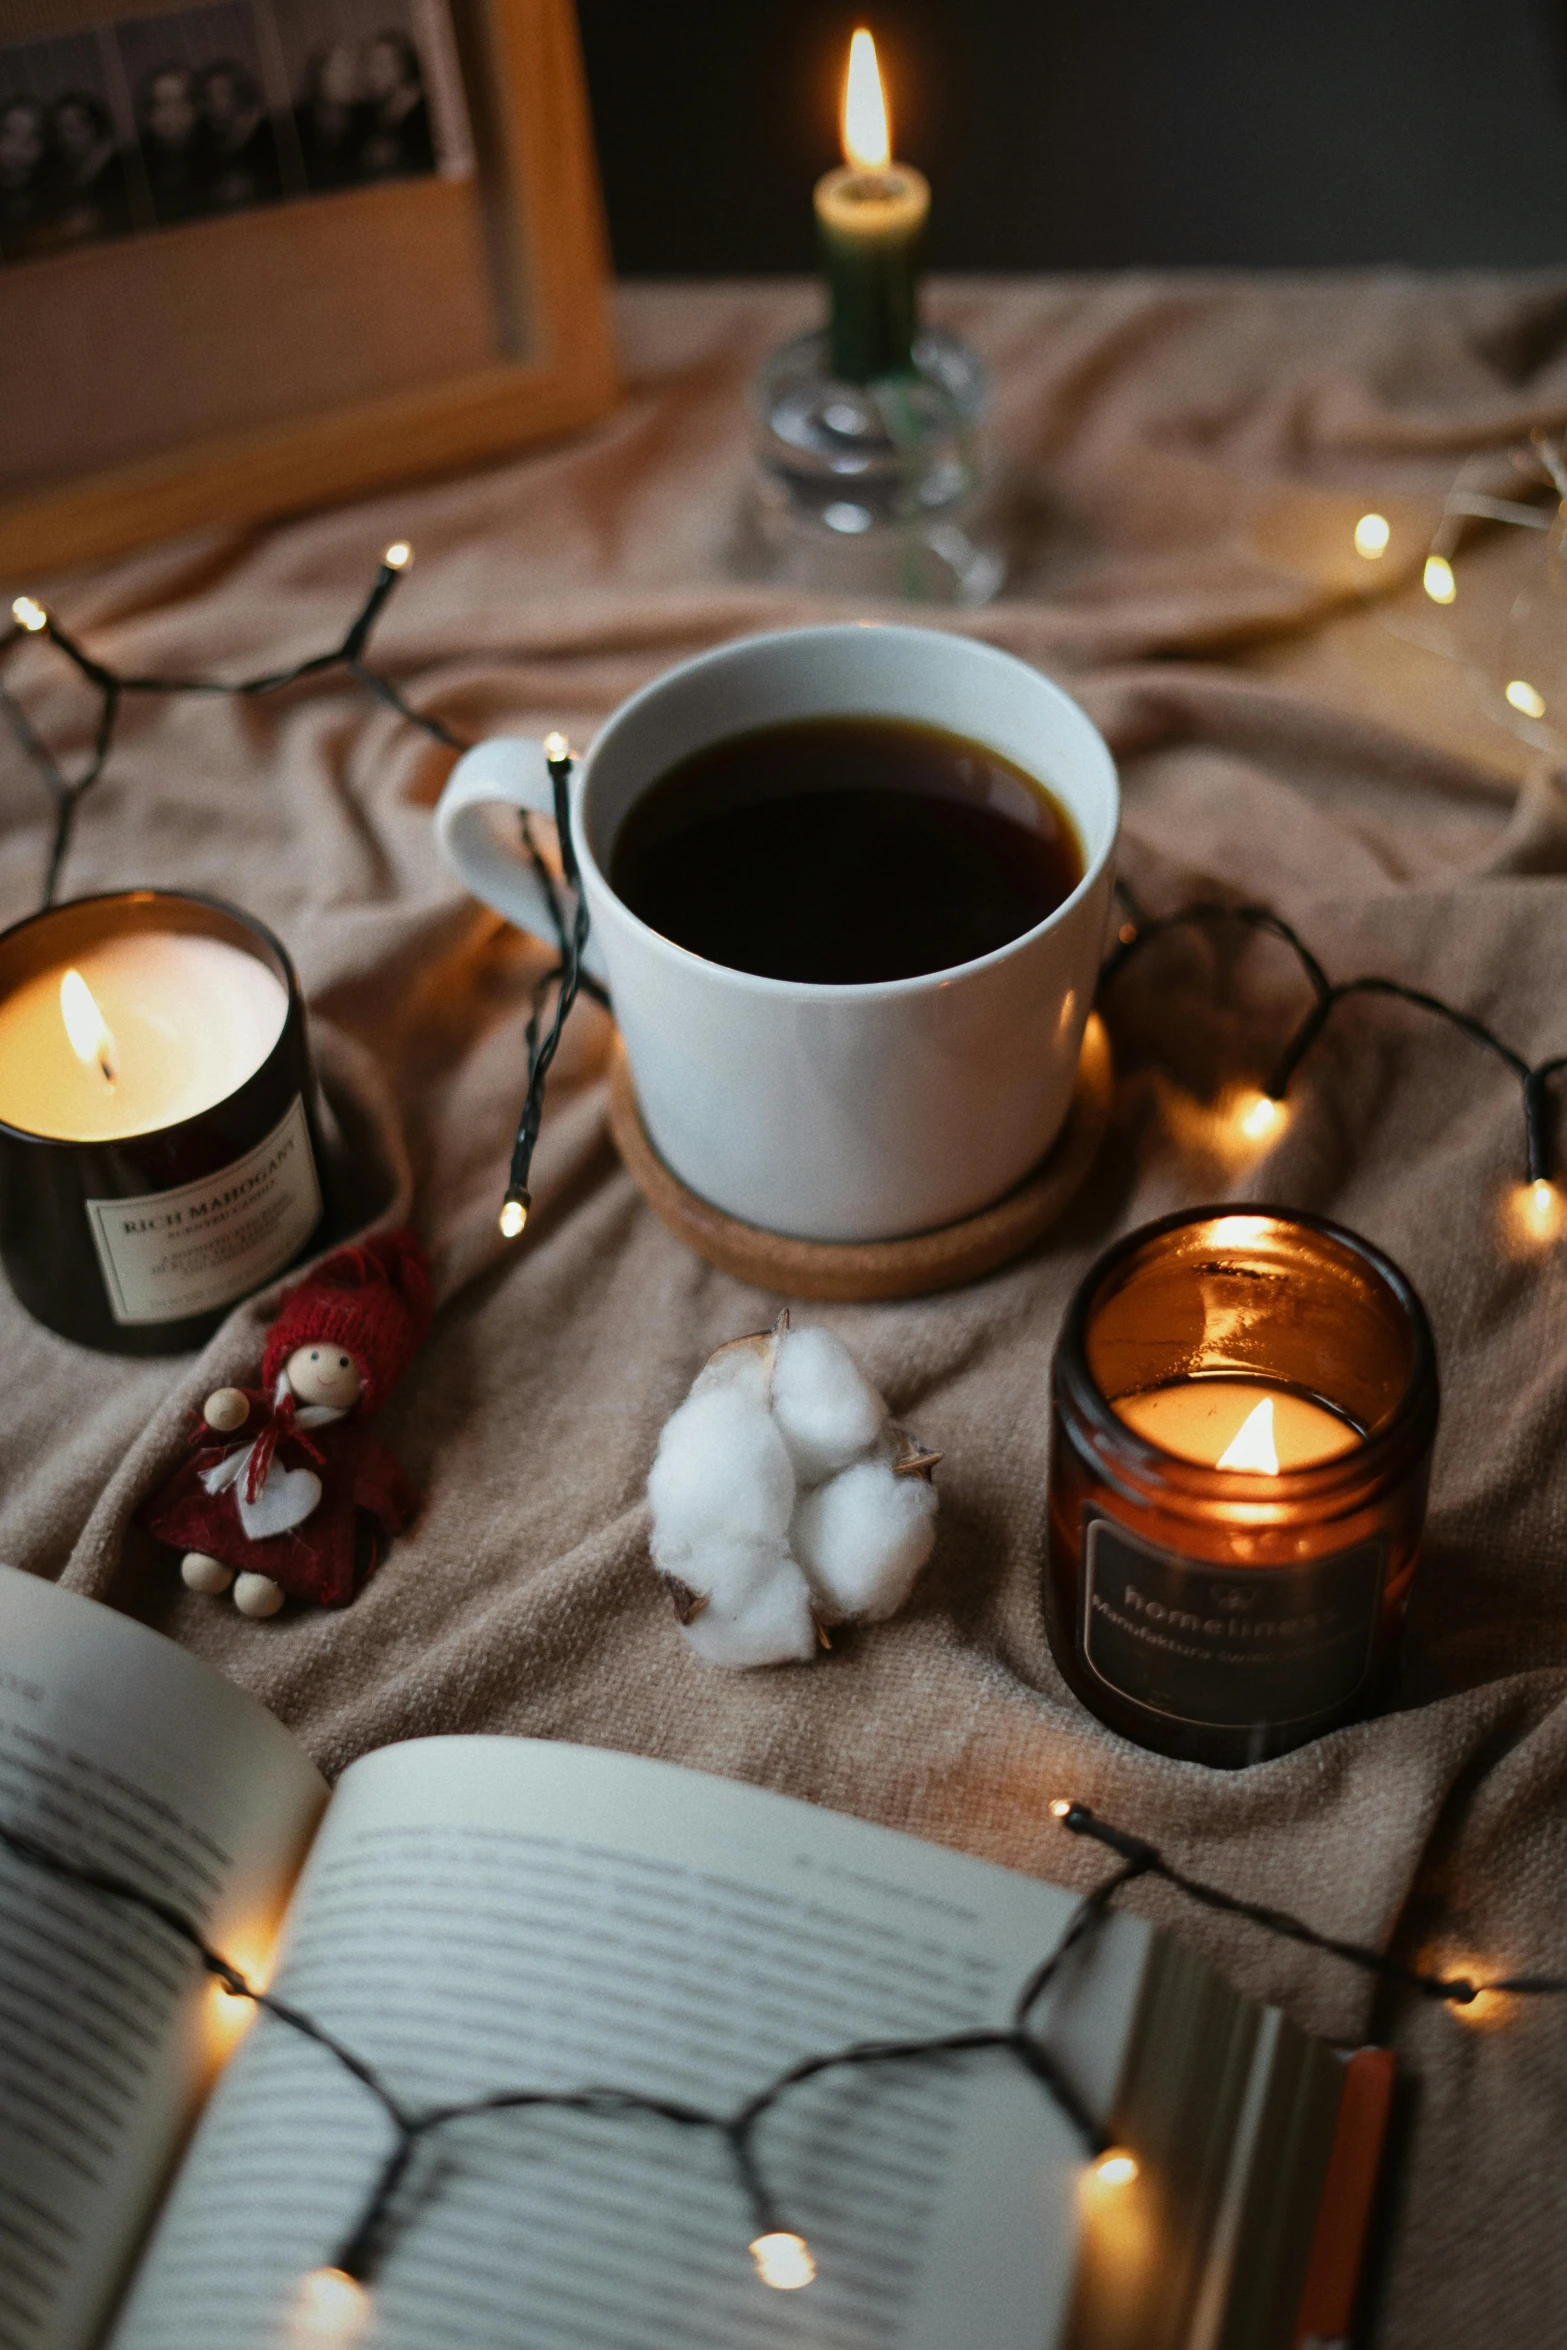 a cup of coffee, candles, and an open book on a table